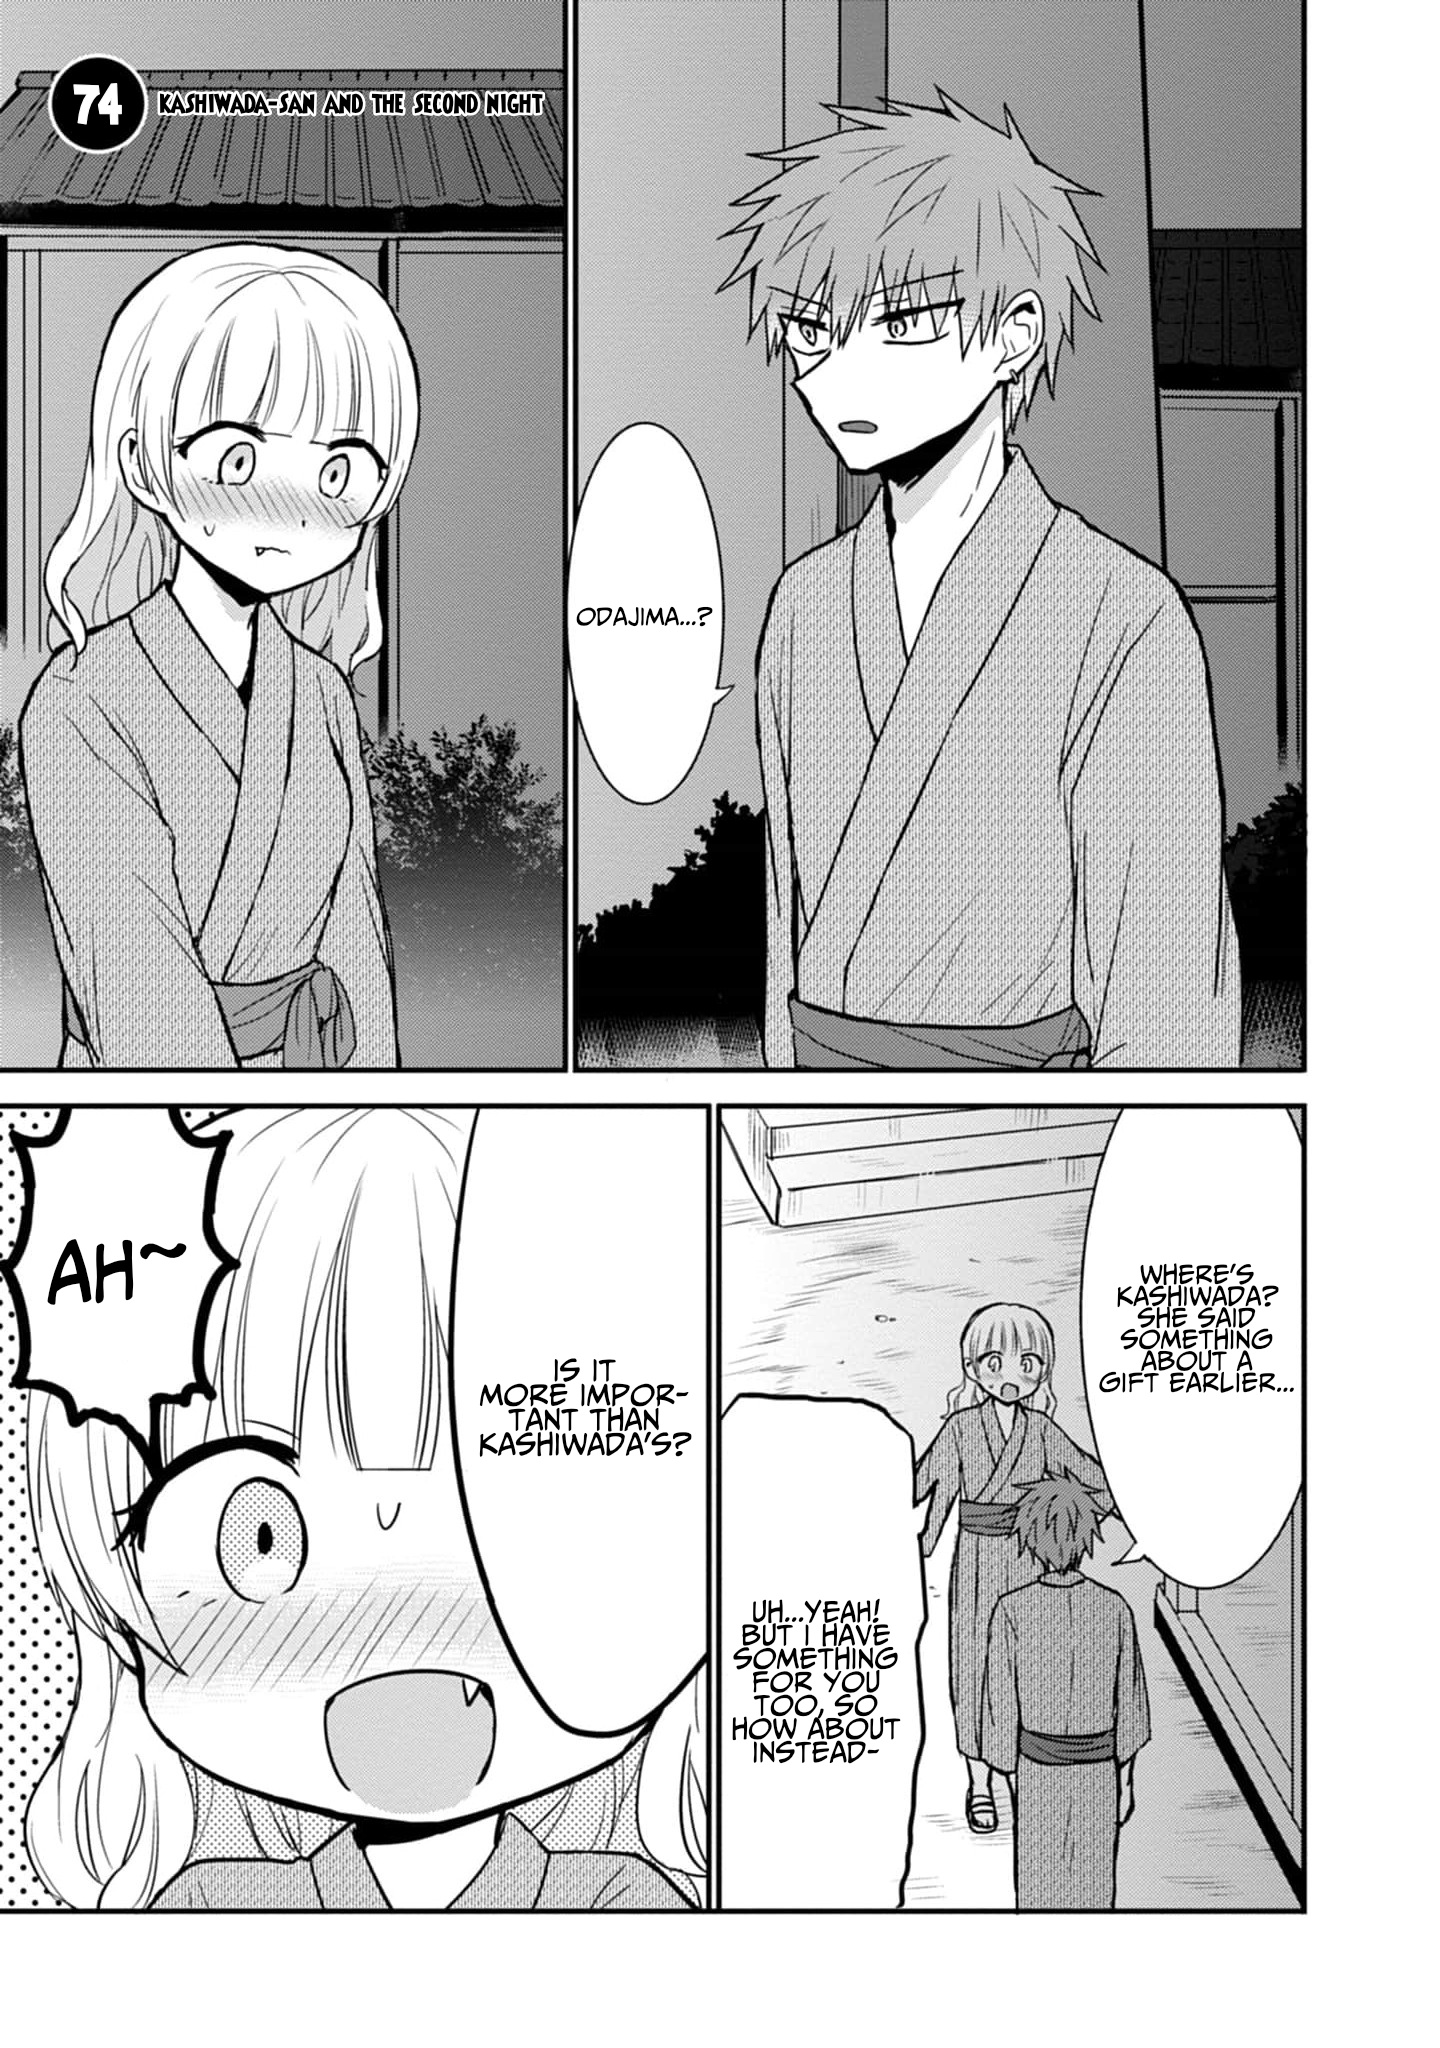 Expressionless Kashiwada-San And Emotional Oota-Kun Vol.6 Chapter 74: Kashiwada-San And The Second Night - Picture 2